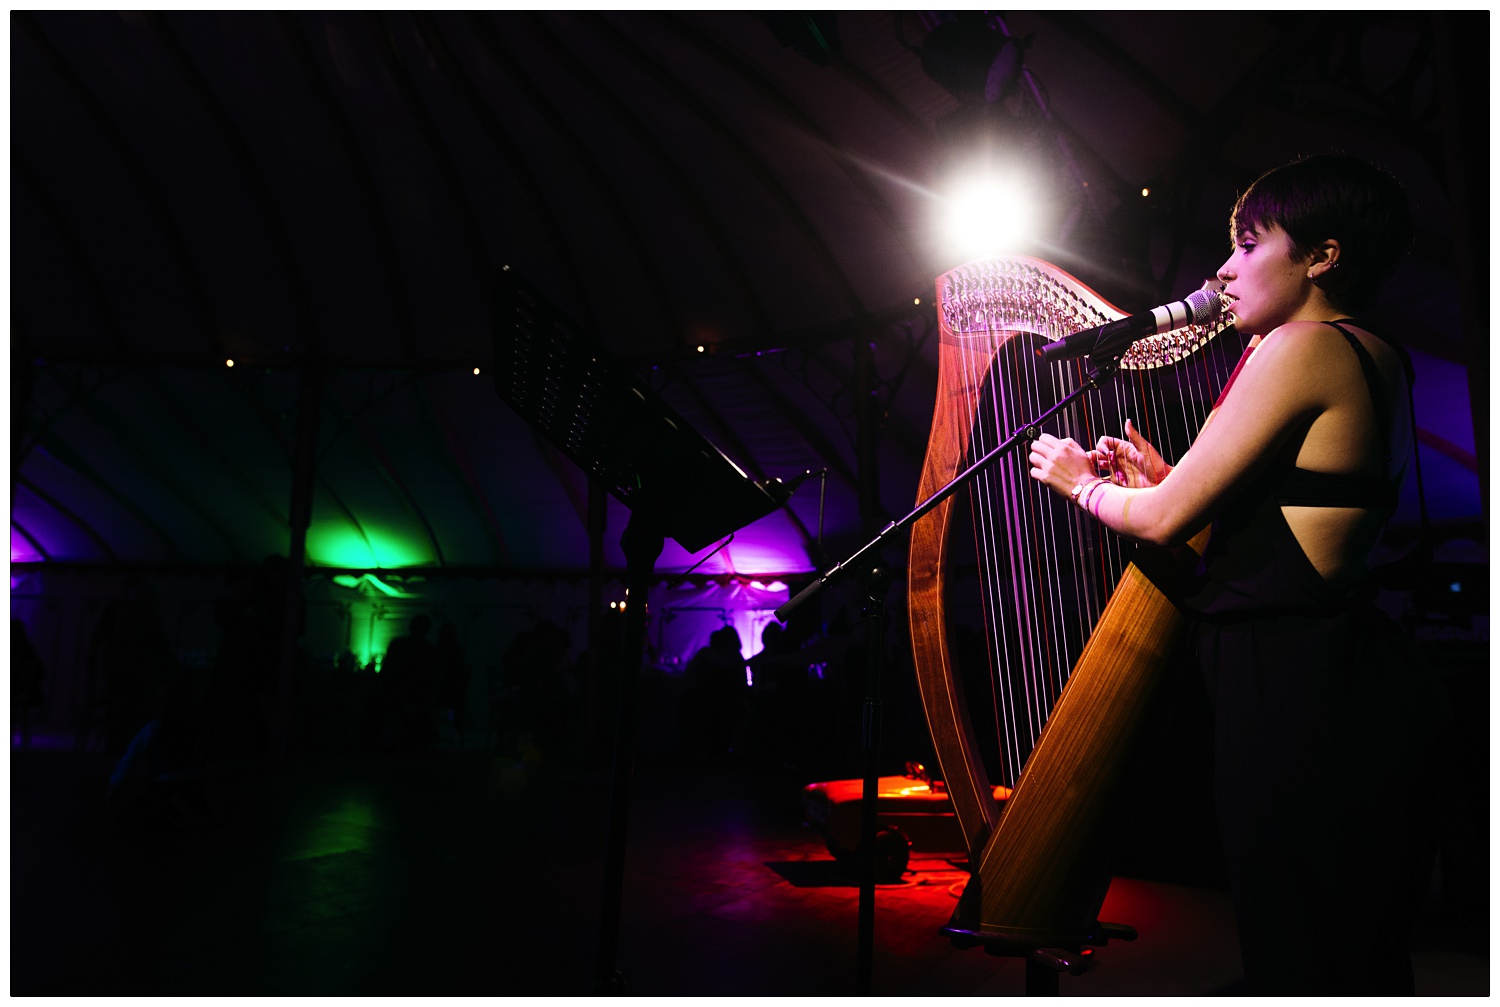 Anna McLuckie plays the harp in an orangery tent at a wedding. It is lit up with red, white, purple and green lights.